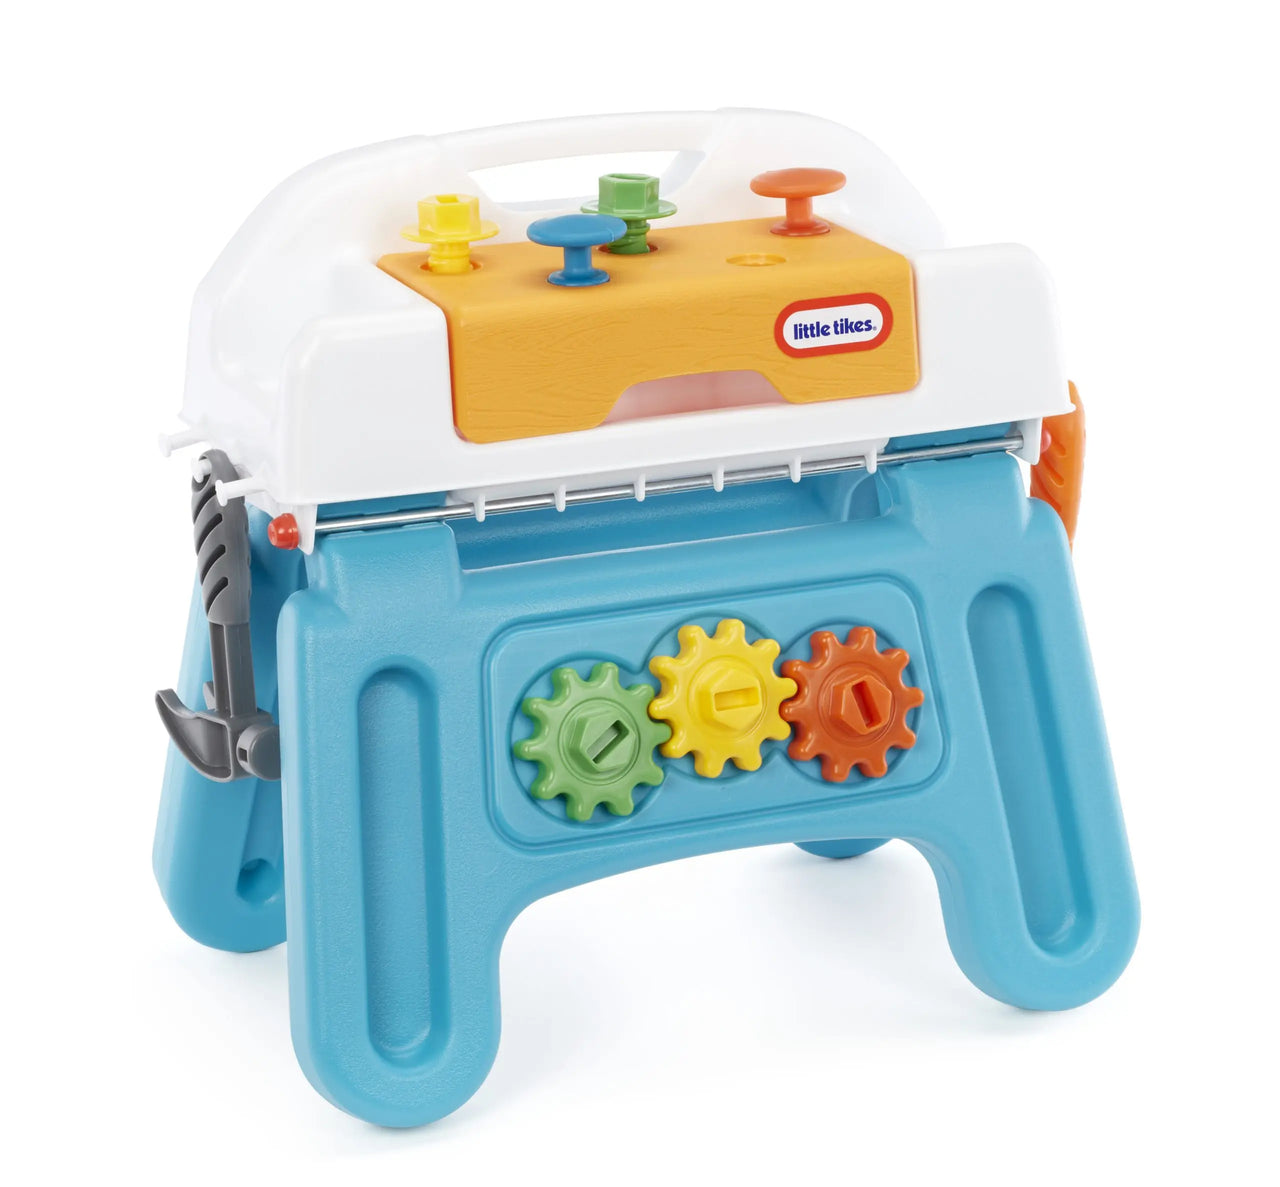 Little Tikes First Tool Bench Master Kids Company Little Tikes 